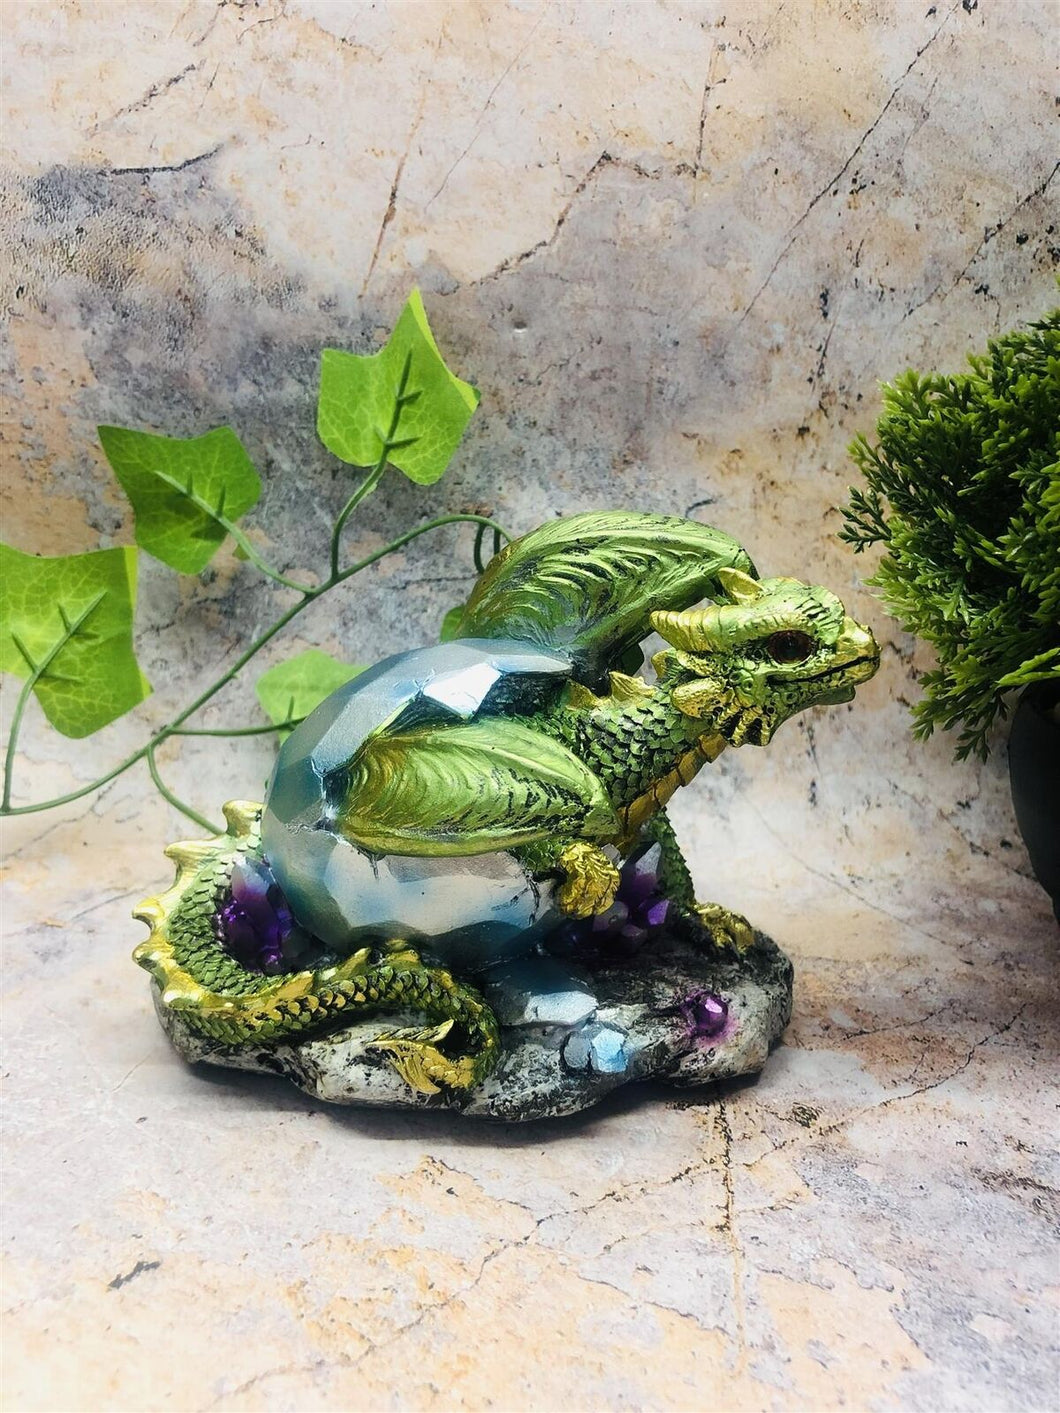 Green Dragon Hatchling Figurine Fantasy Art Collection Mythical Sculpture